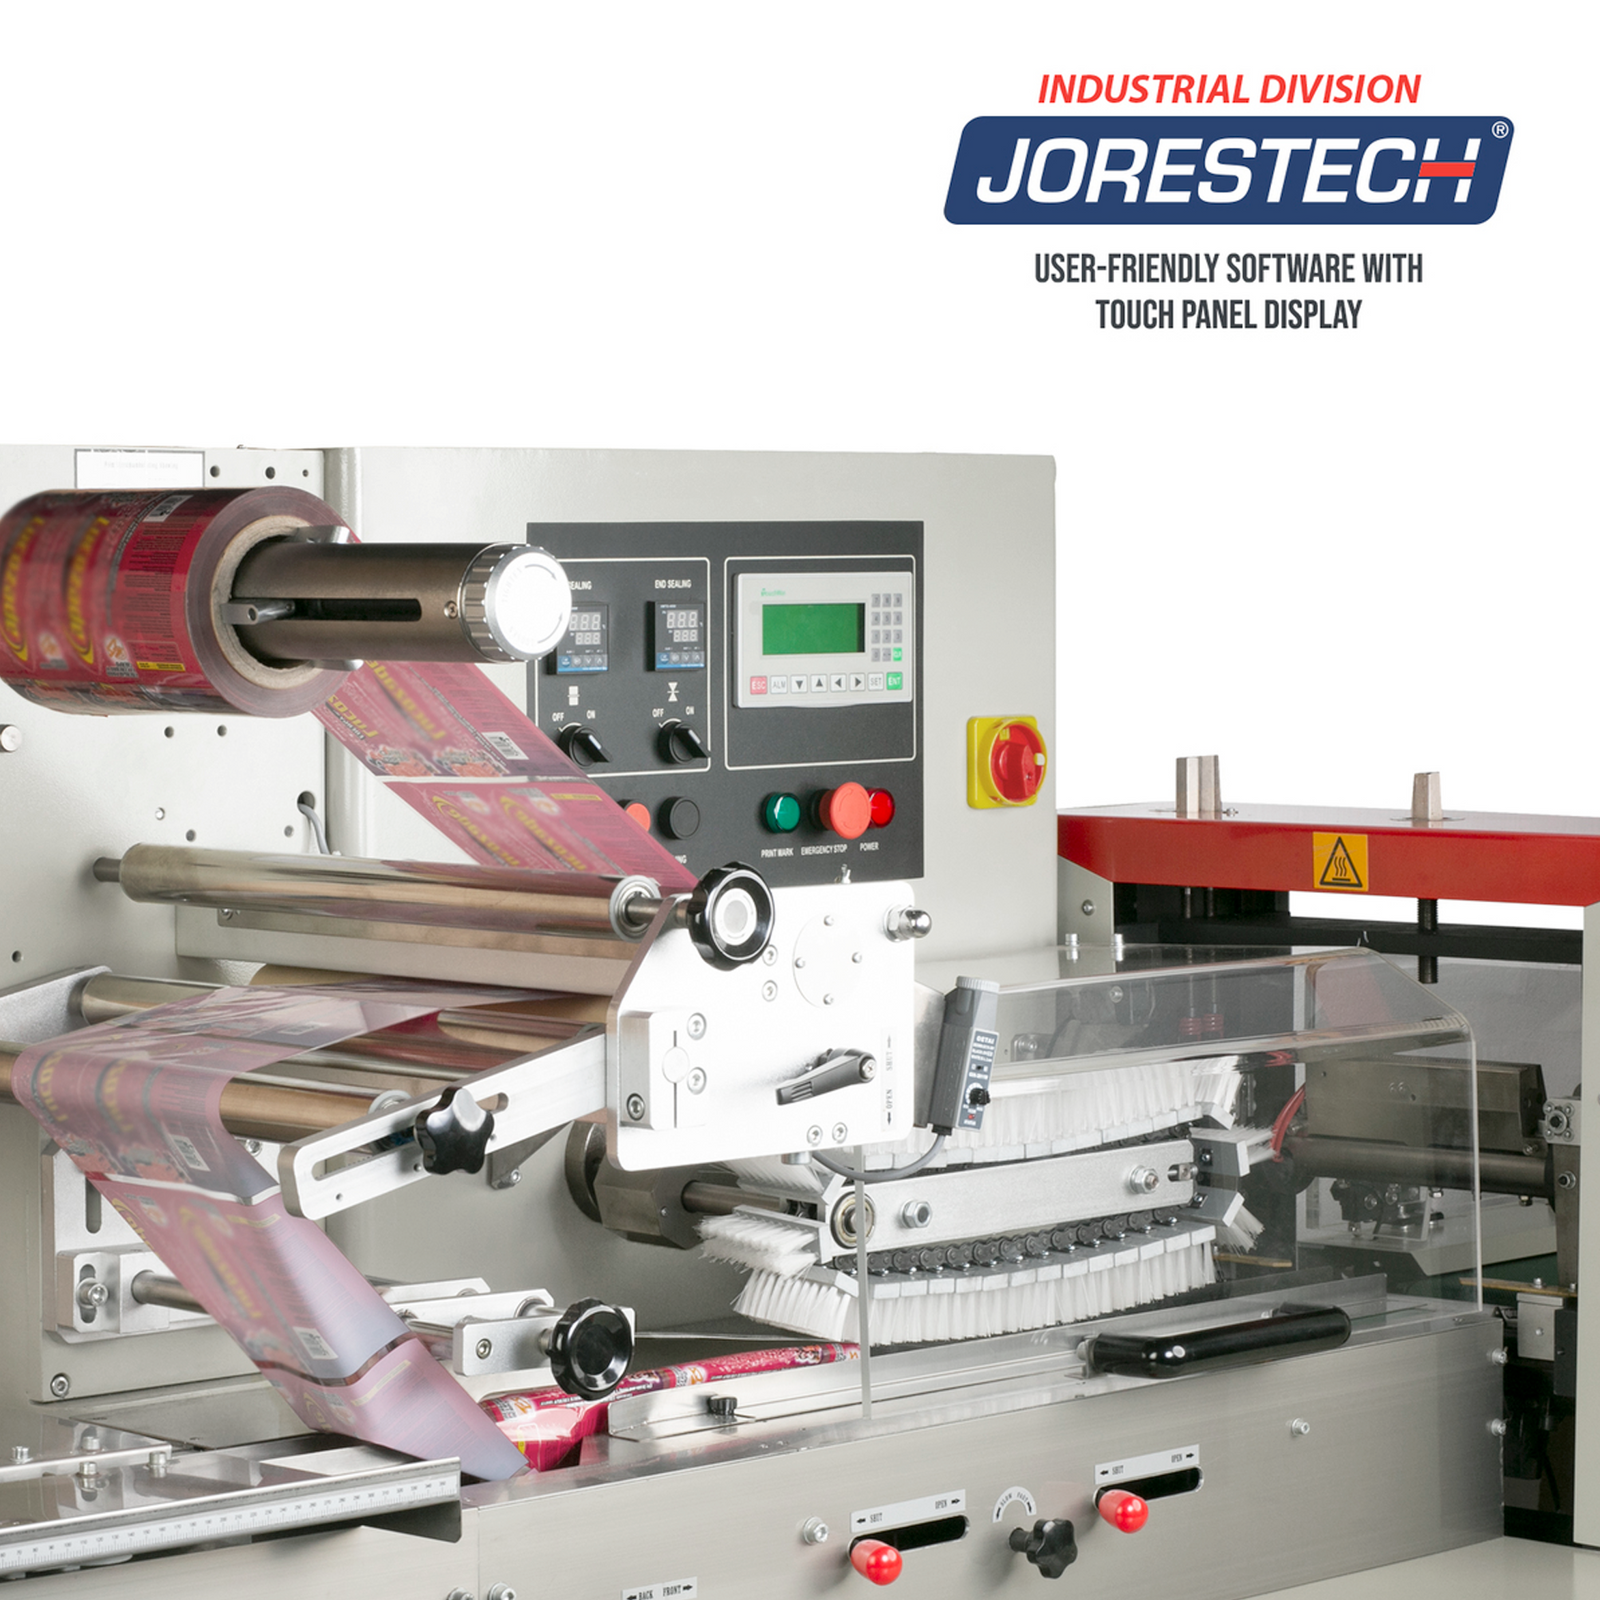 The packaging and sealing area on an automatic HFFS flow pack system. The film roll holder is equipped with a red packaging film roll threaded through the machine and ready for use.  JORES TECHNOLOGIES® industrial logo is shown and a statement that reads User friendly software with touch panel display